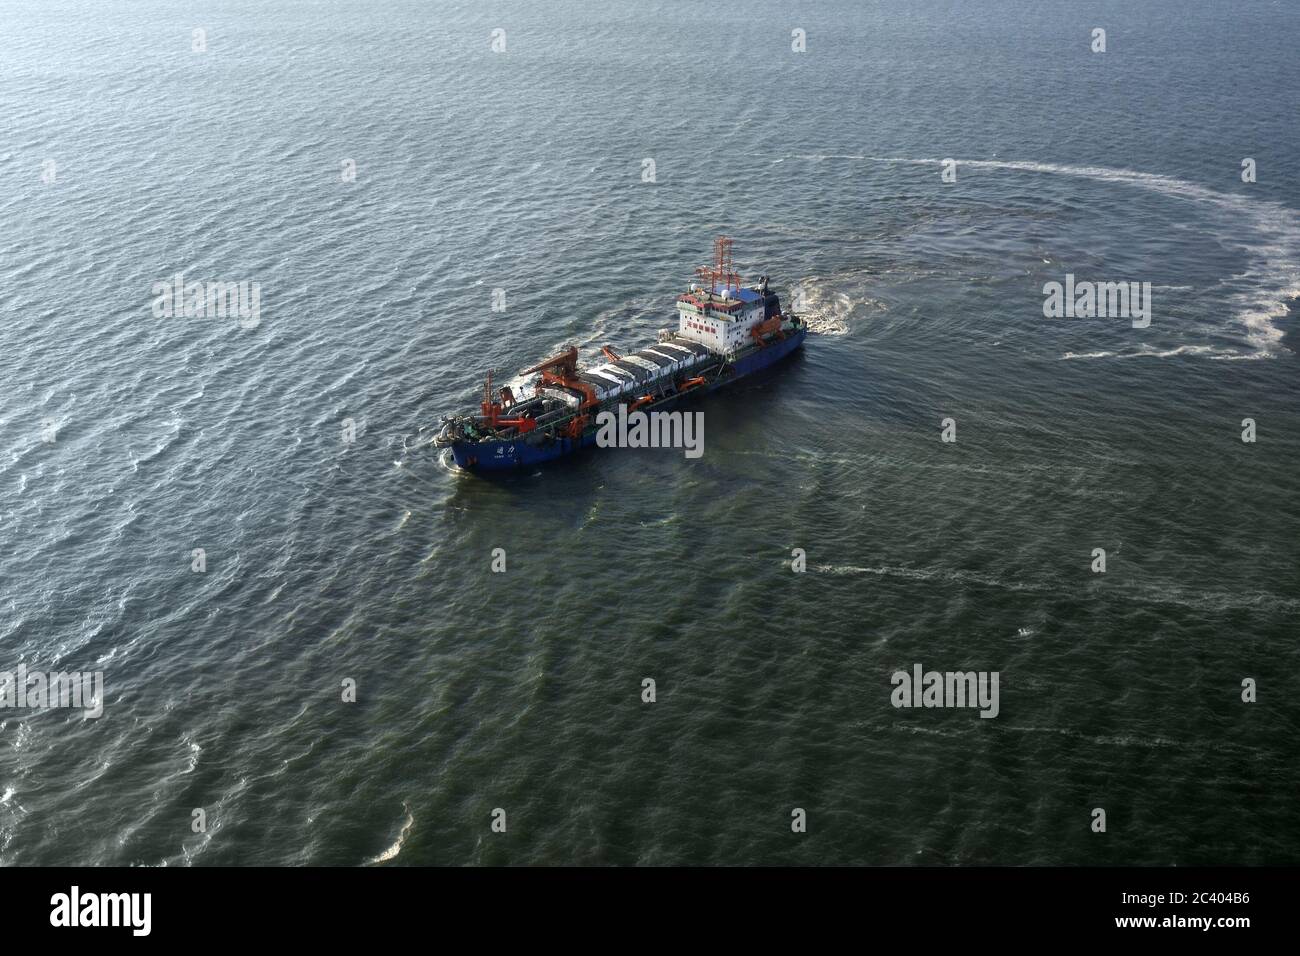 NAMIBIA - JAN 30. 2016: Chinese cargo ship Tong Li in the Atlantic Ocean off the coast of Africa near Luderitz port. Aerial view. Chinese expansion on Stock Photo